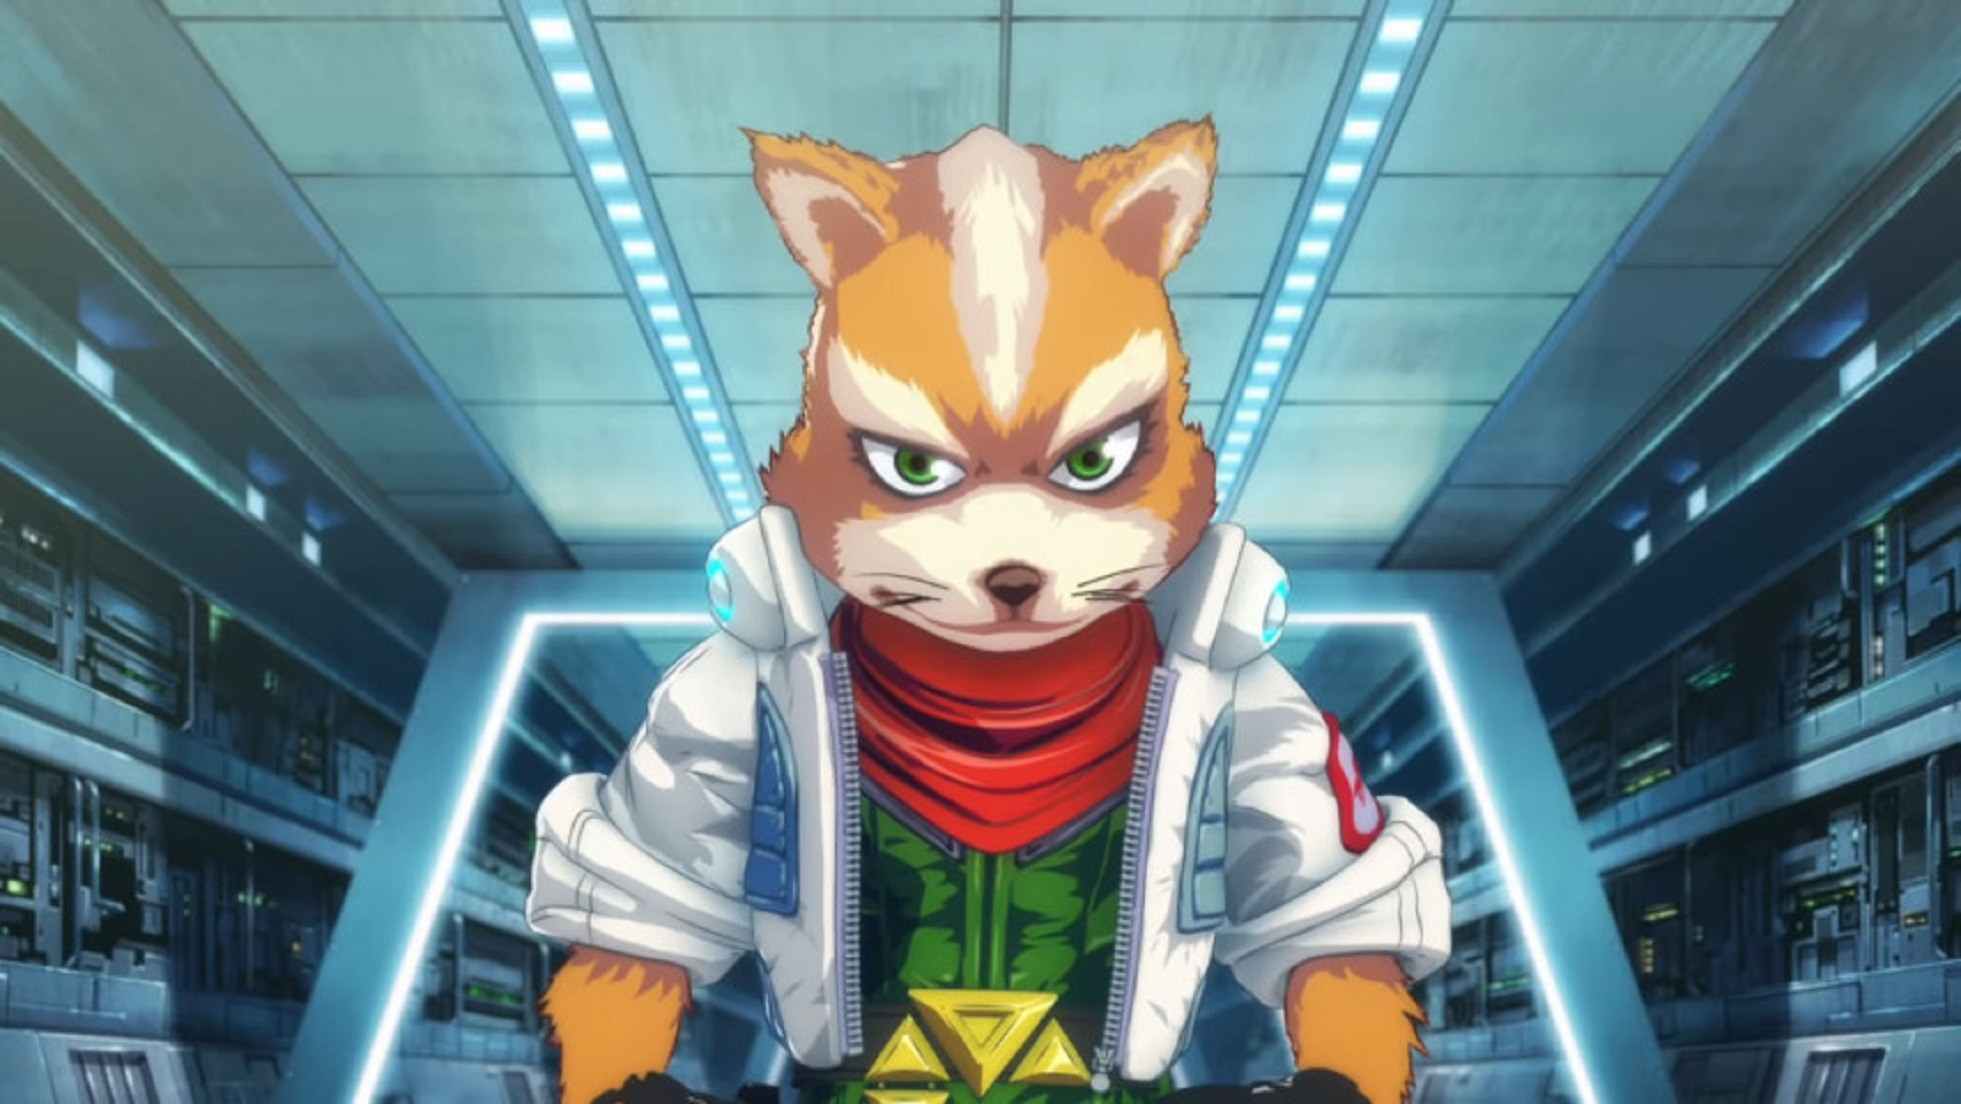 Update: Nintendo Switch Online Adds Six Games: Star Fox 2, Super Punch-Out And Others To Their NES And Super NES Library